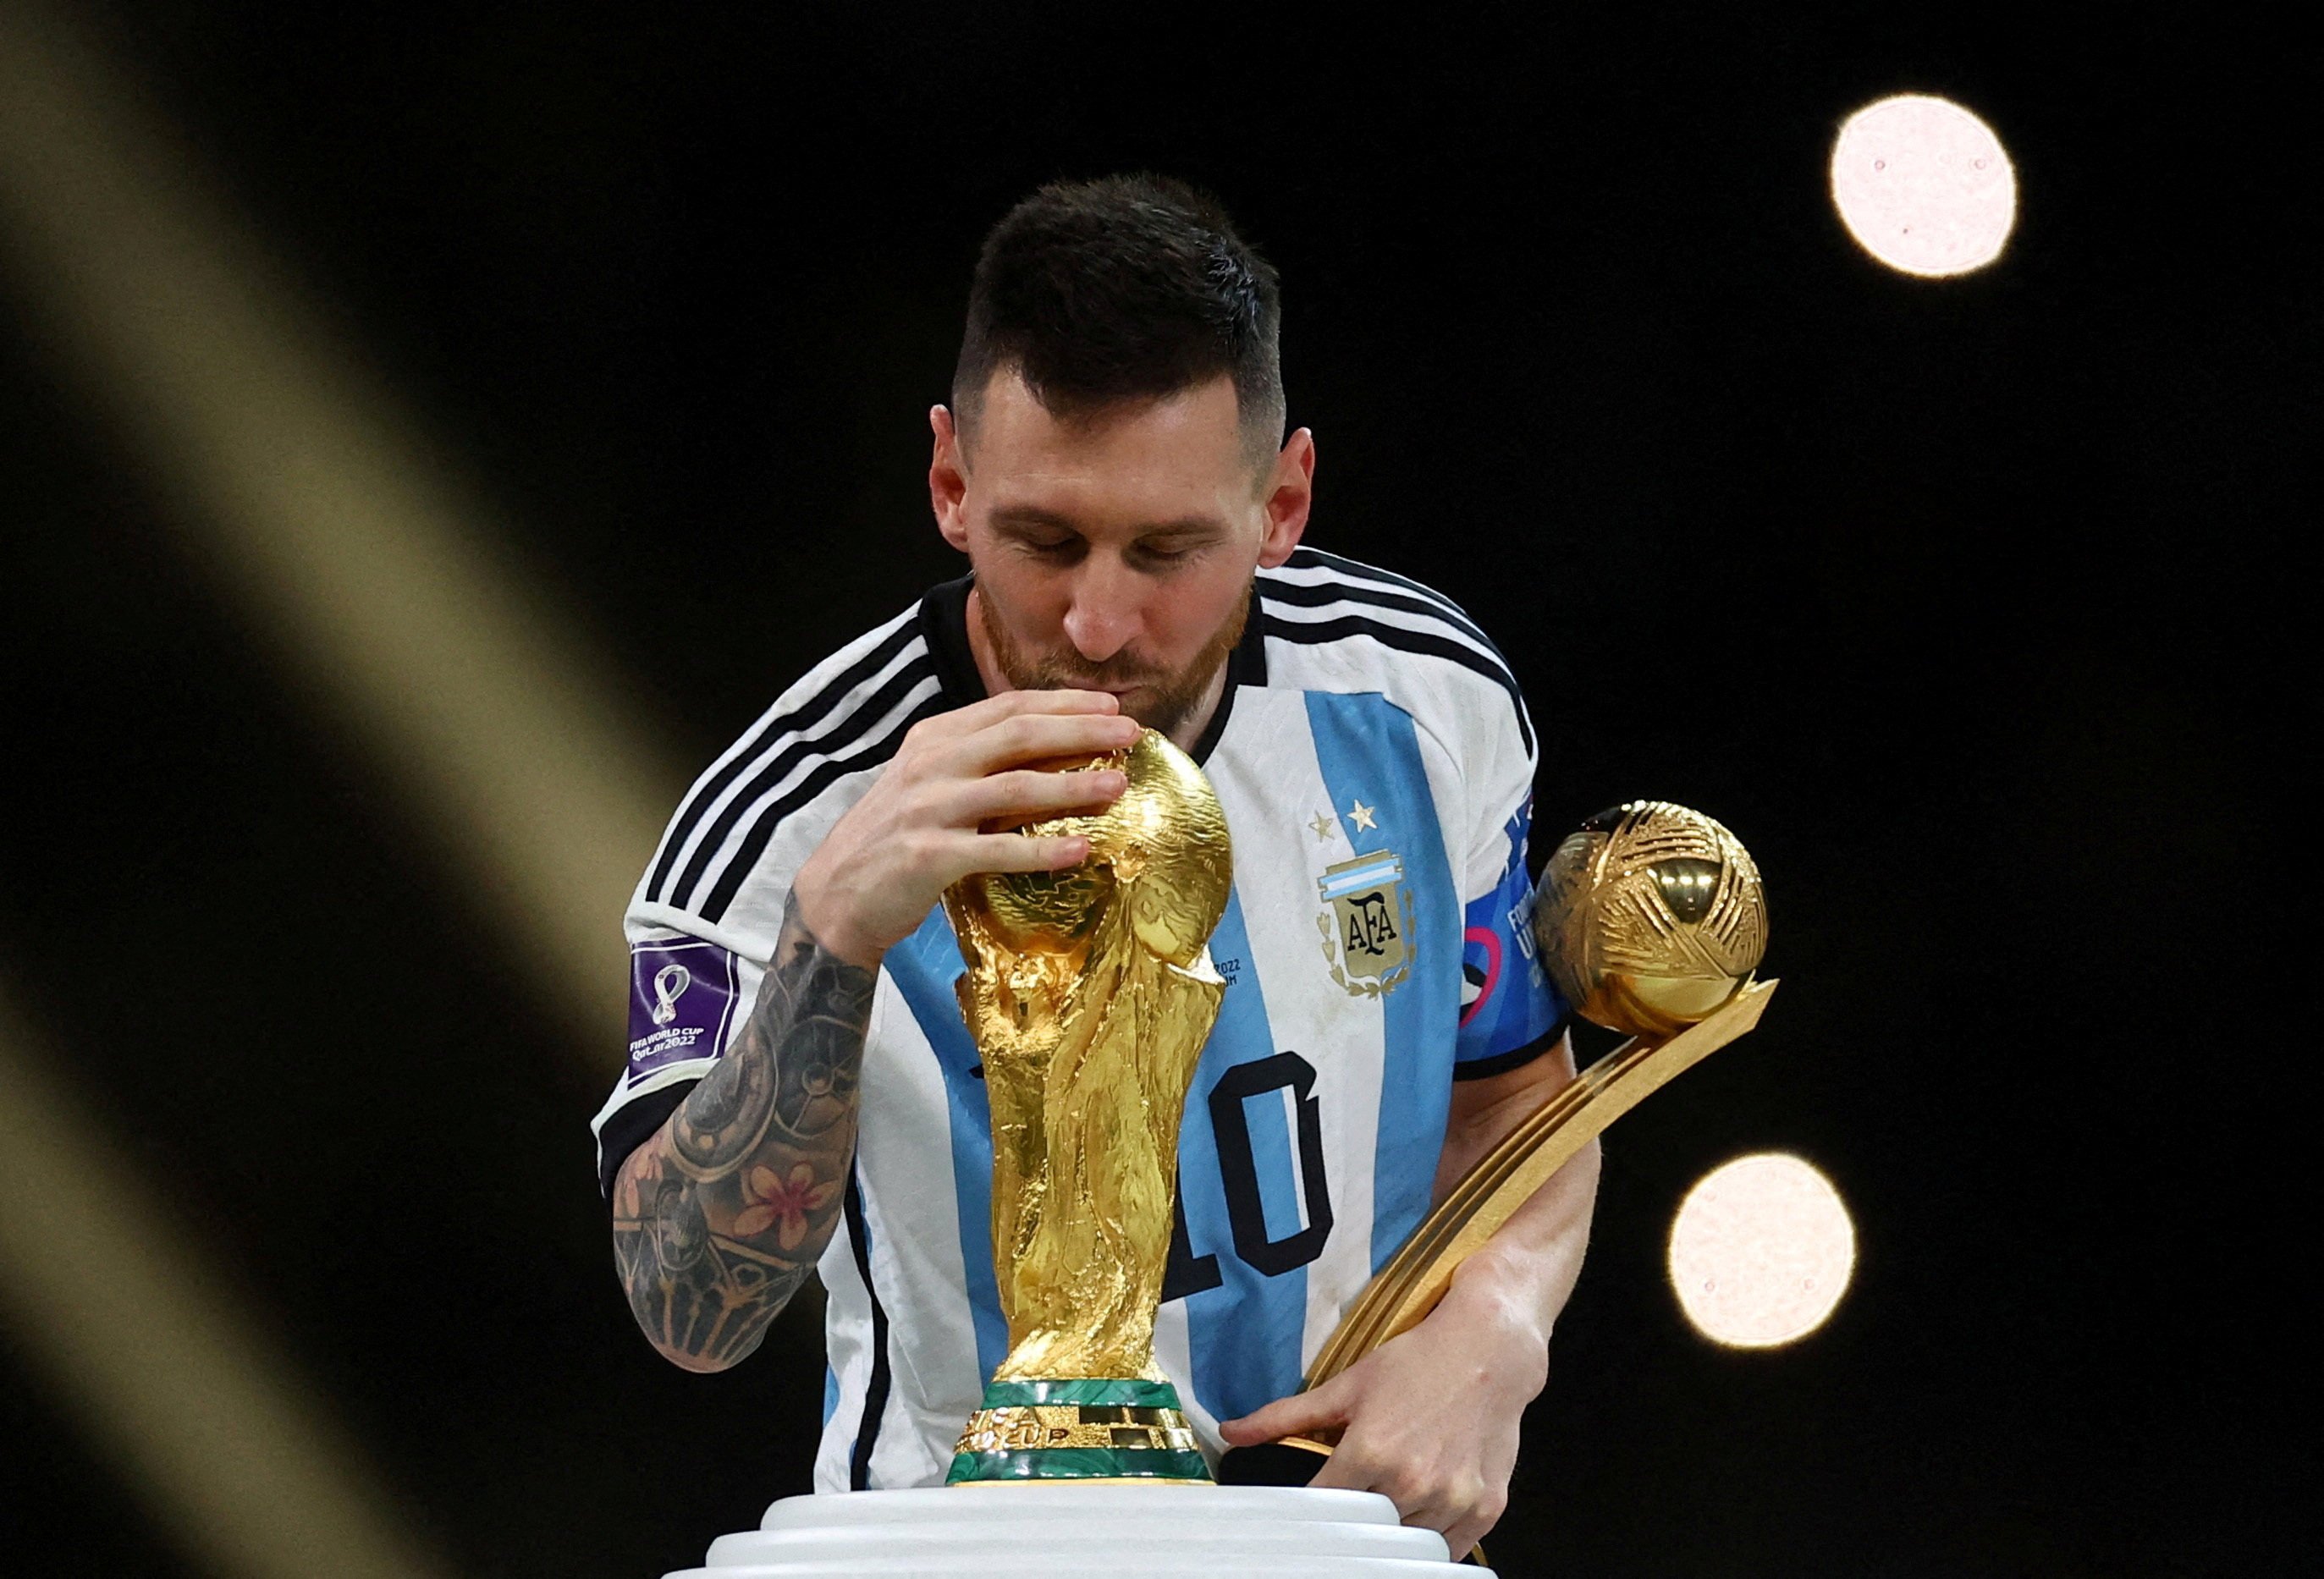 Messi World Cup 2022  Depth Effect  Wallpapers Central